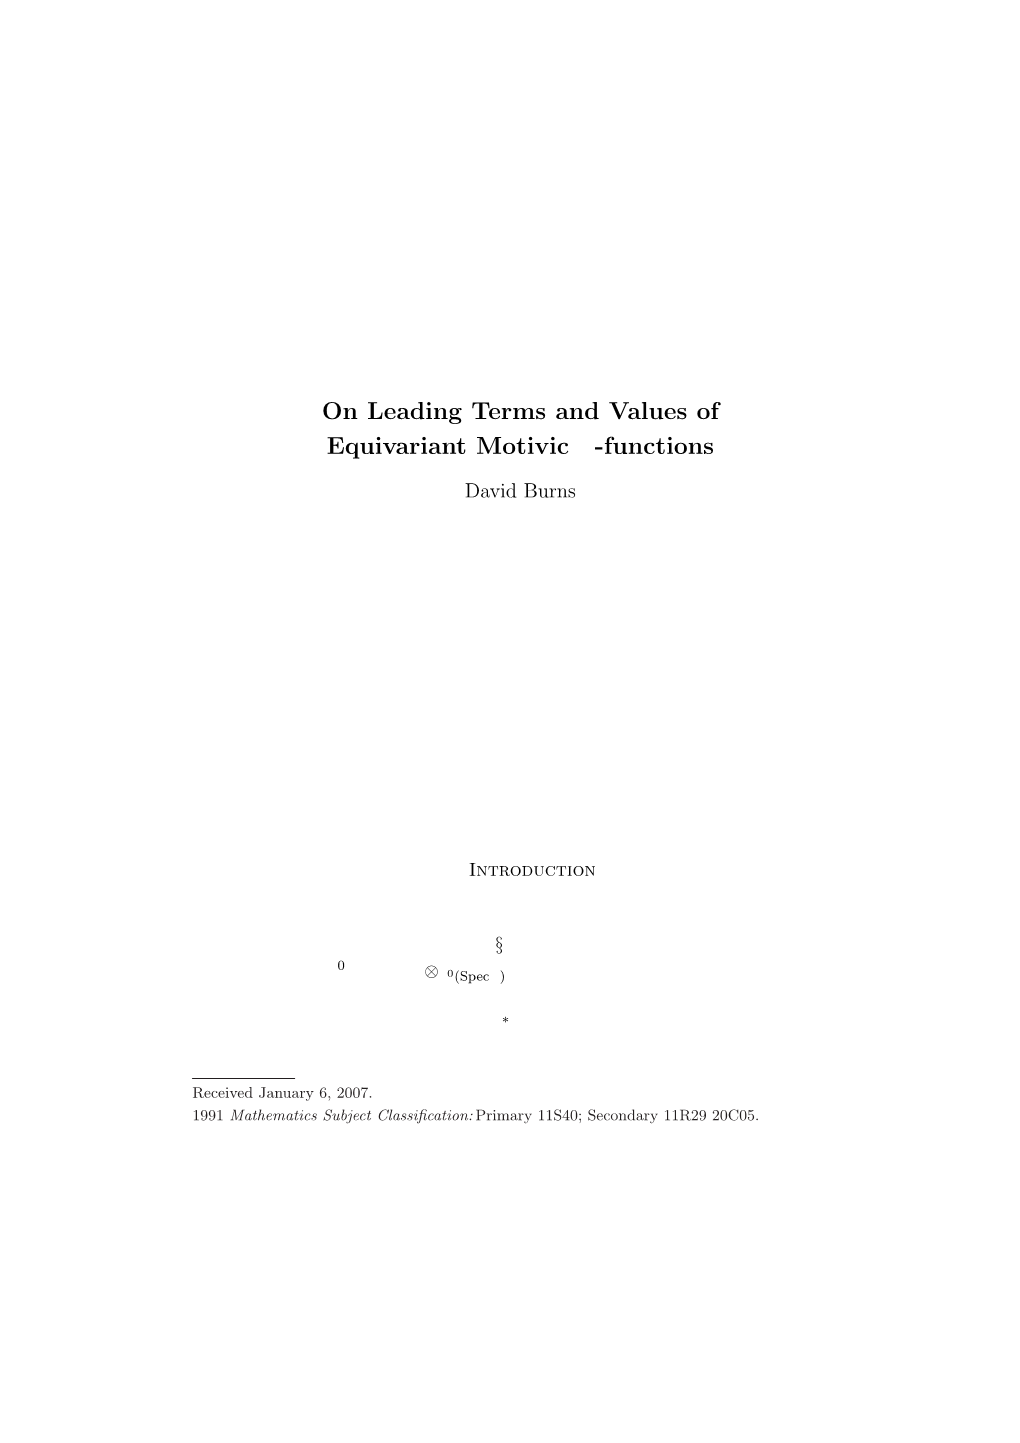 On Leading Terms and Values of Equivariant Motivic L-Functions